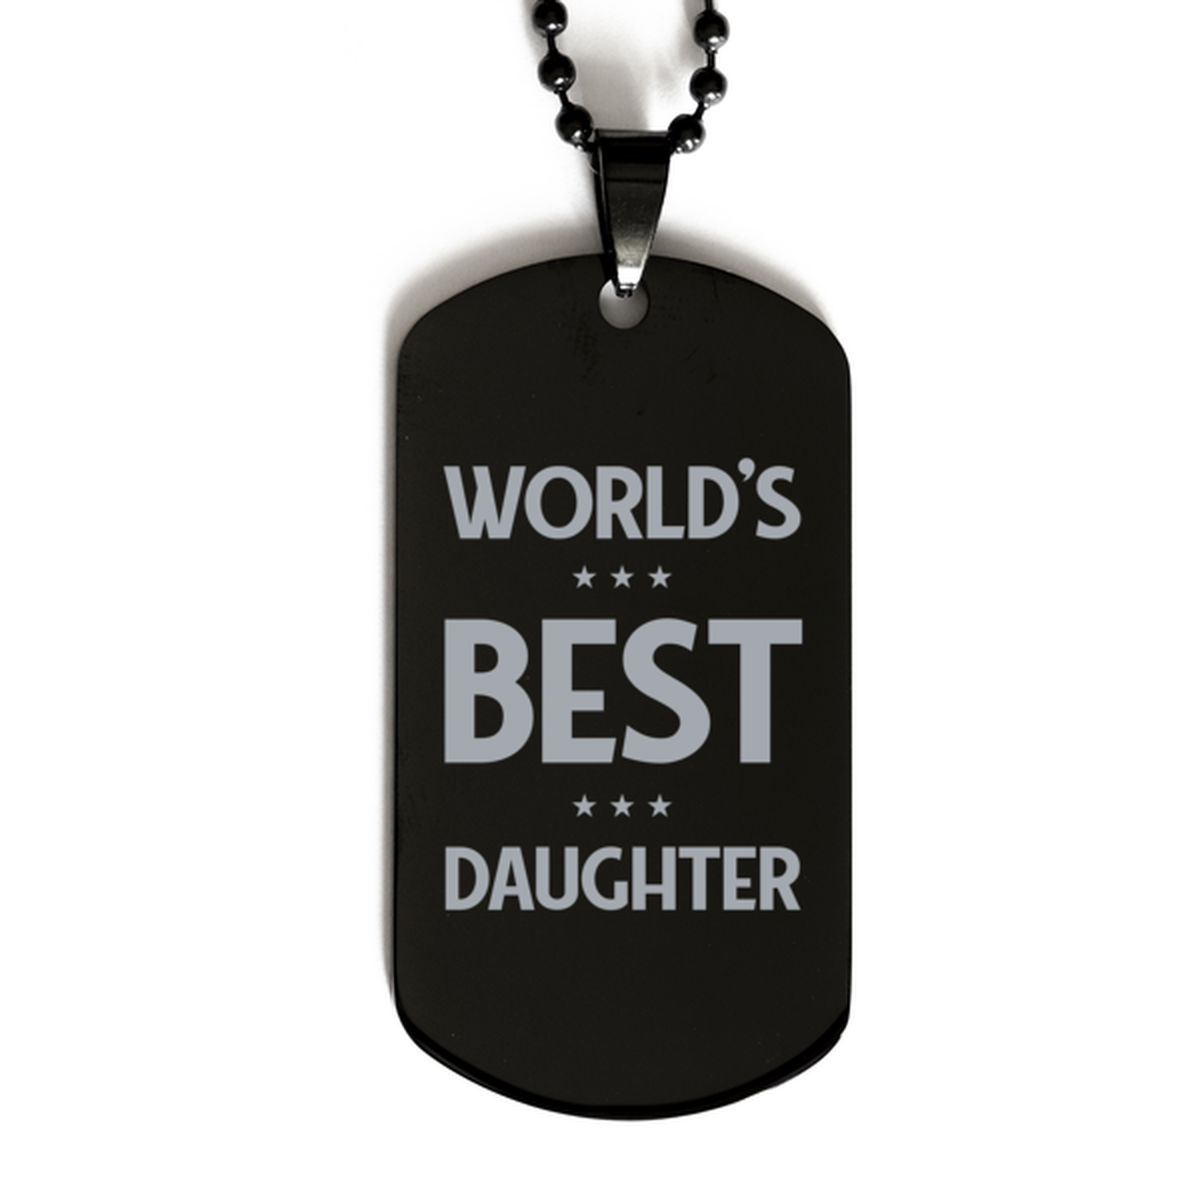 Worlds Best Daughter Gifts, Funny Black Engraved Dog Tag For Daughter, Birthday Presents For Women